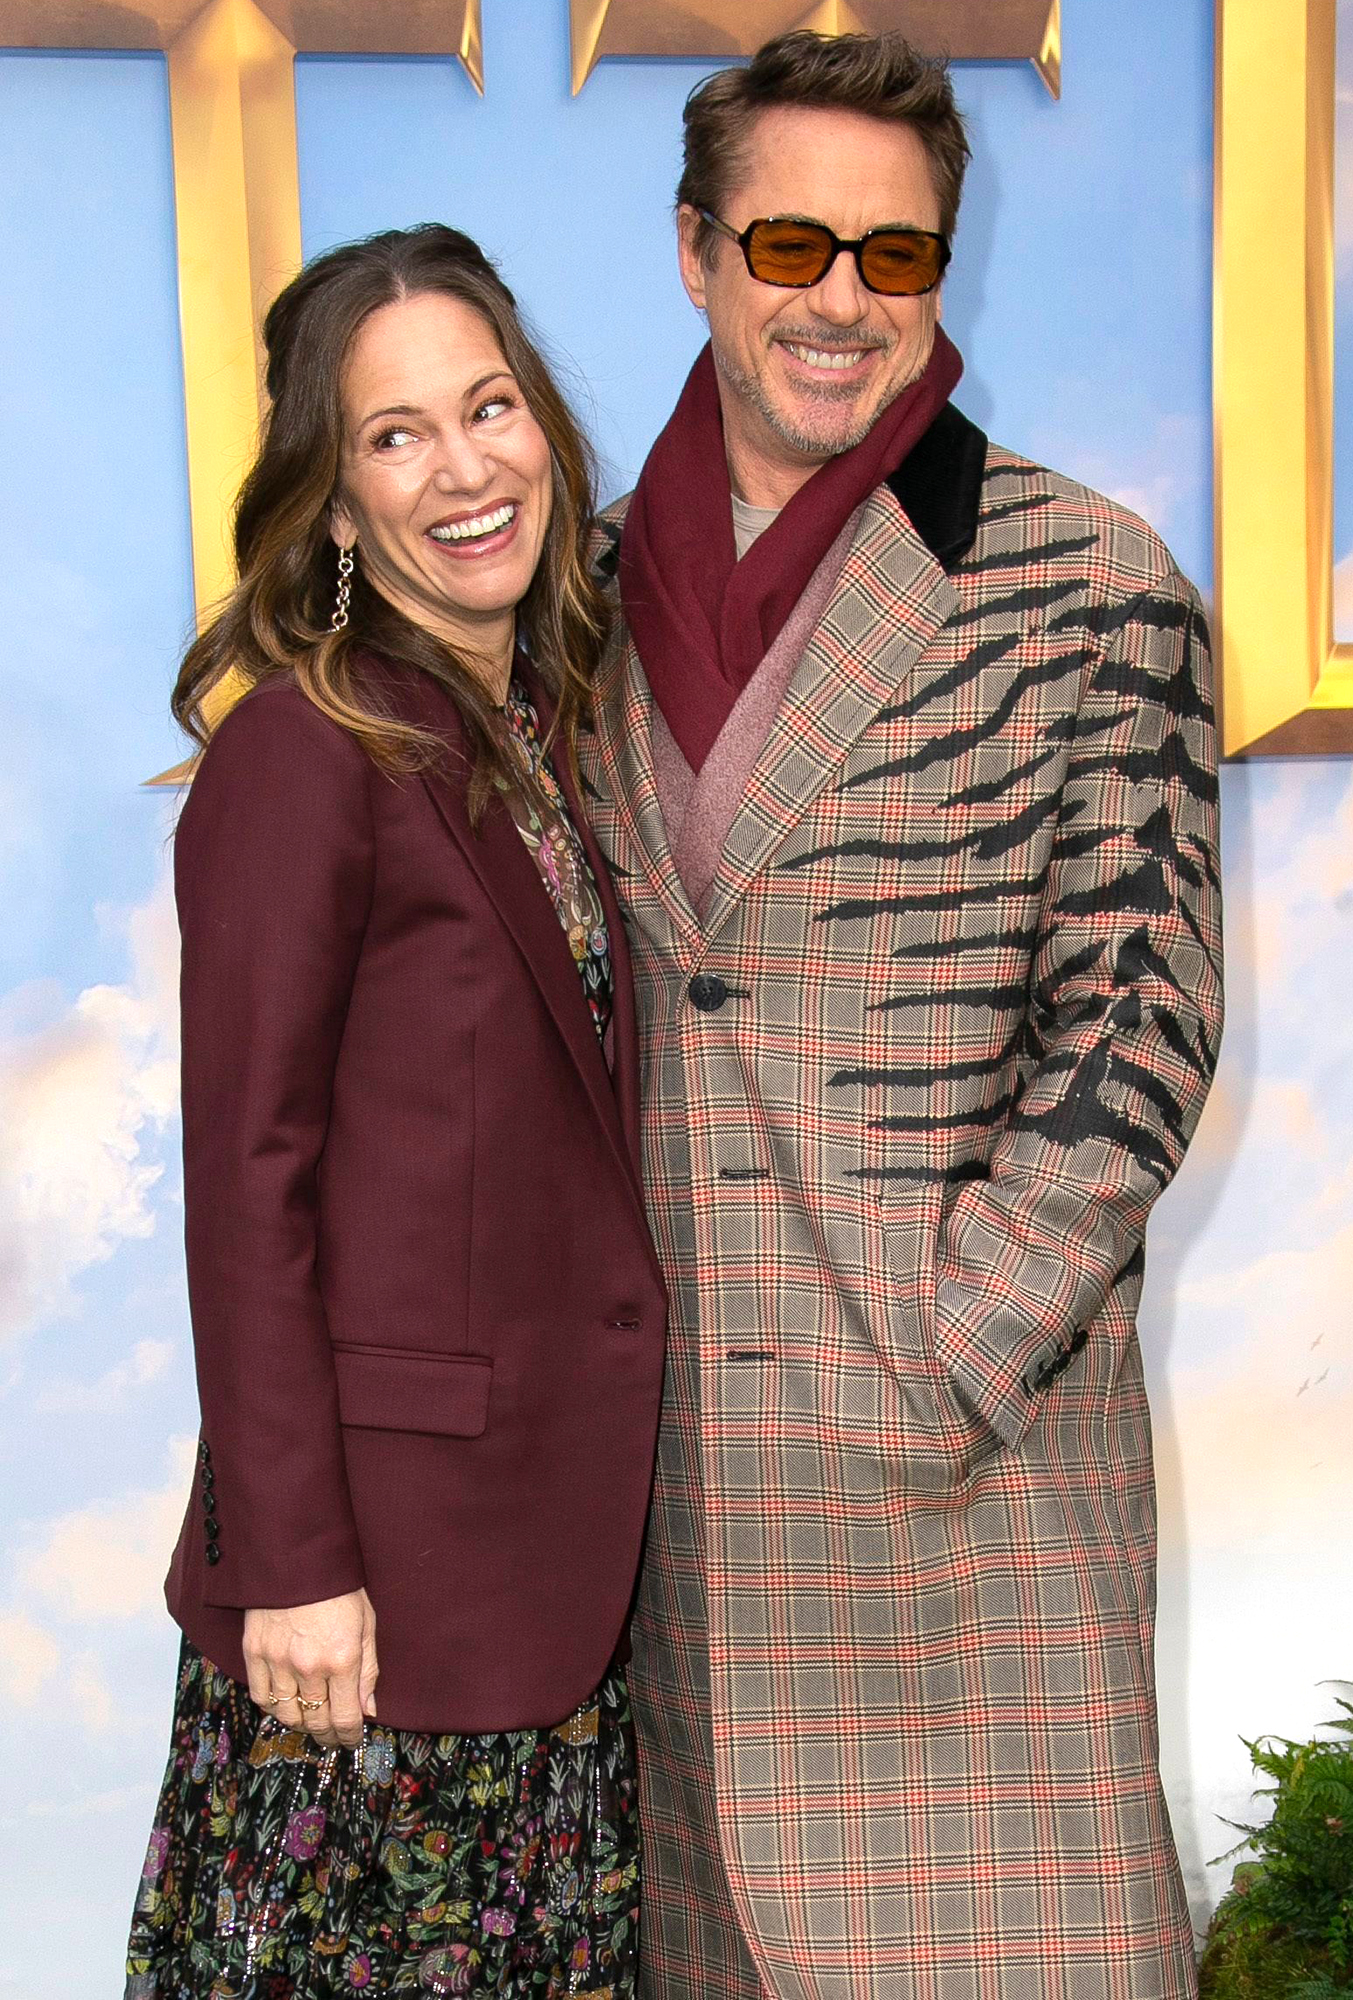 Robert Downey Jr. Has Sweet Birthday 'Vow' for Wife Susan Downey